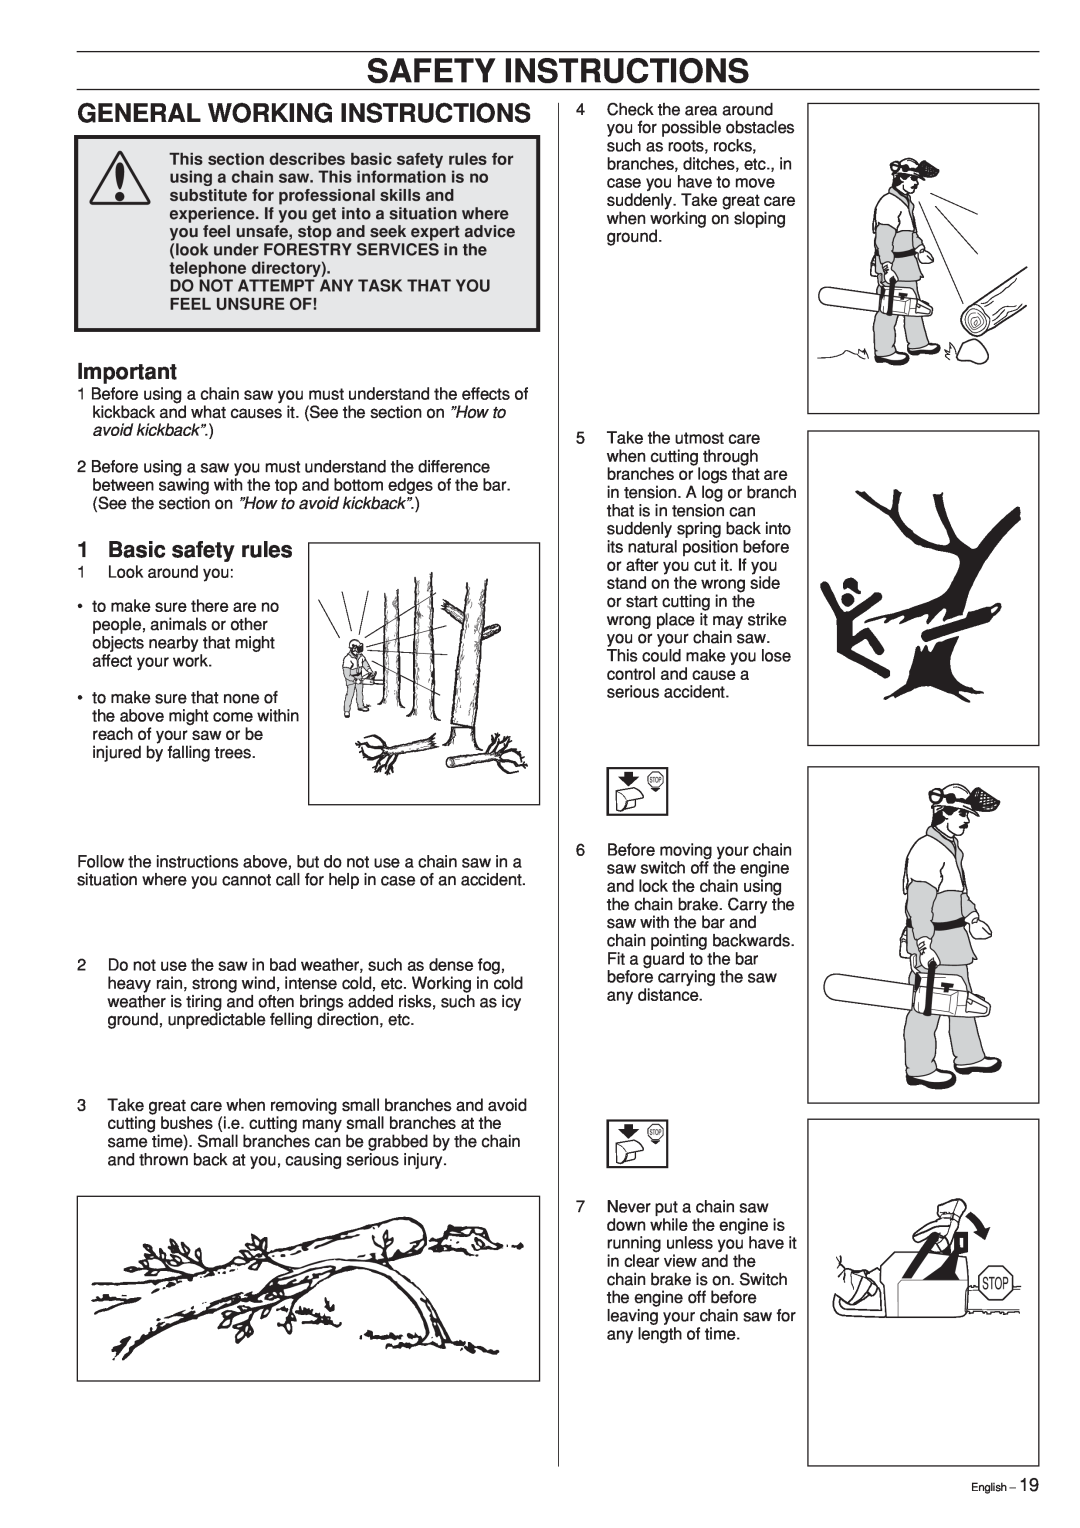 Jonsered CS 2152 manual General Working Instructions, Basic safety rules, Safety Instructions 